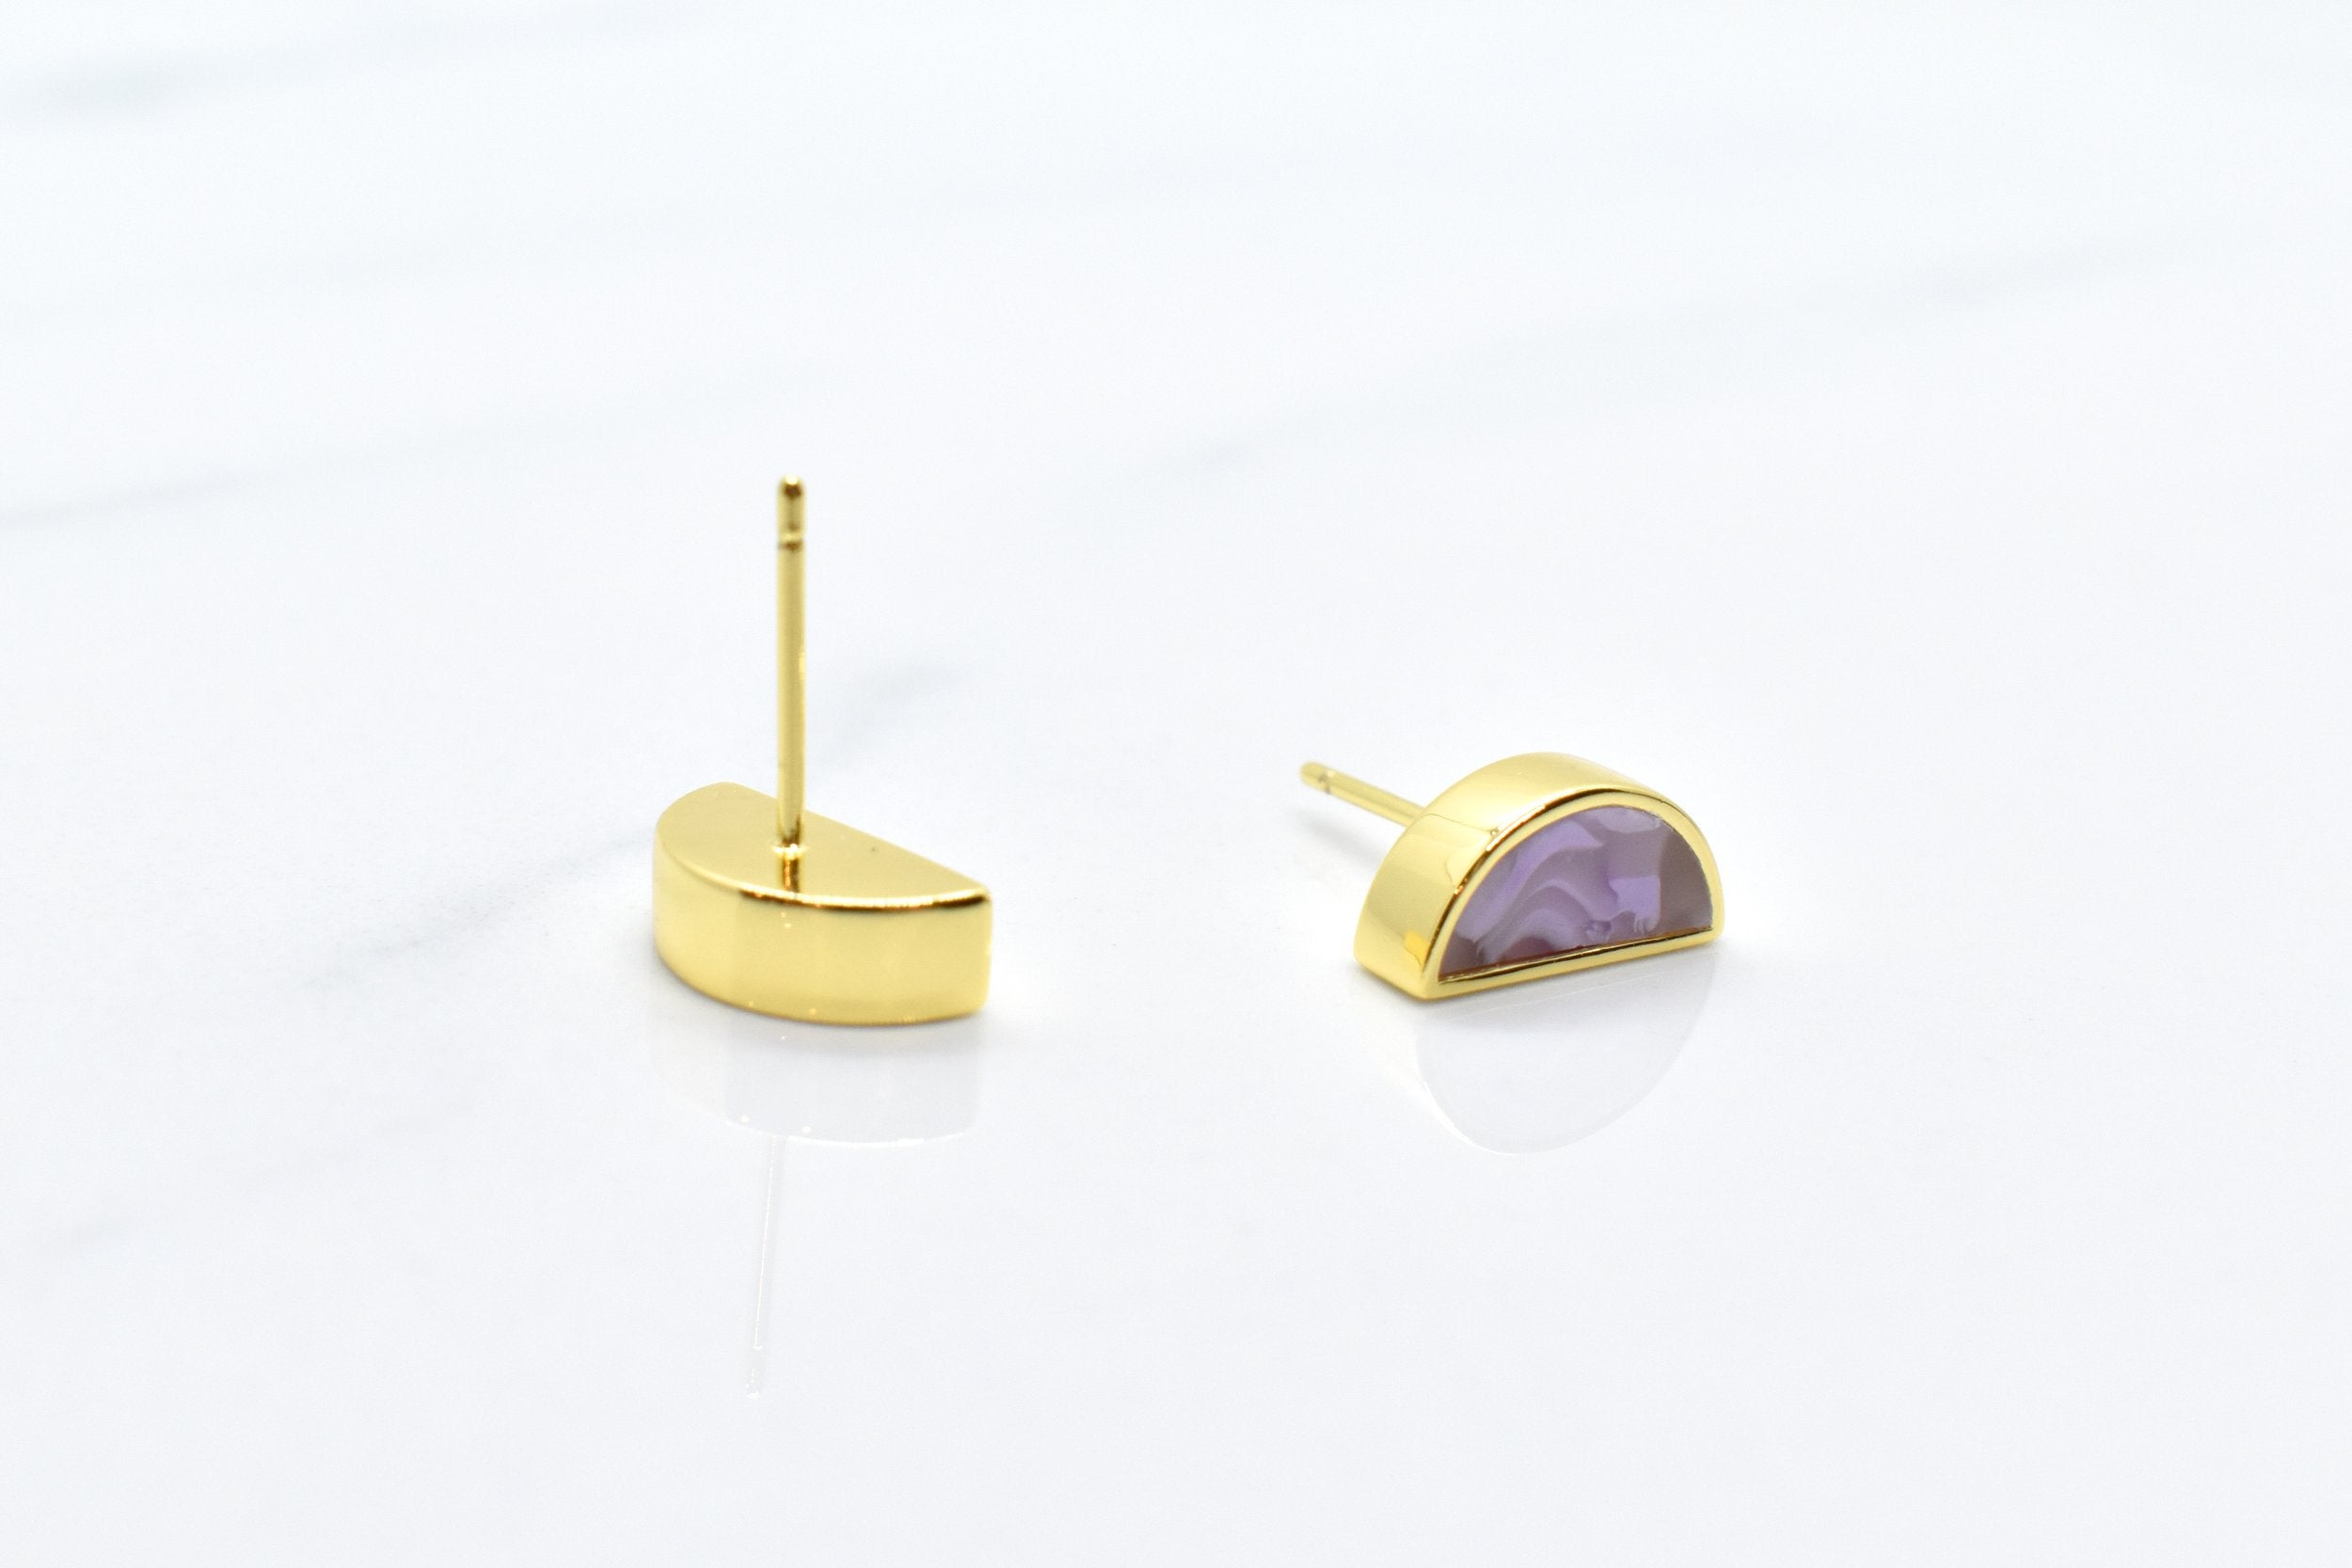 half moon stud earrings in amethyst and gold with surgical steel posts